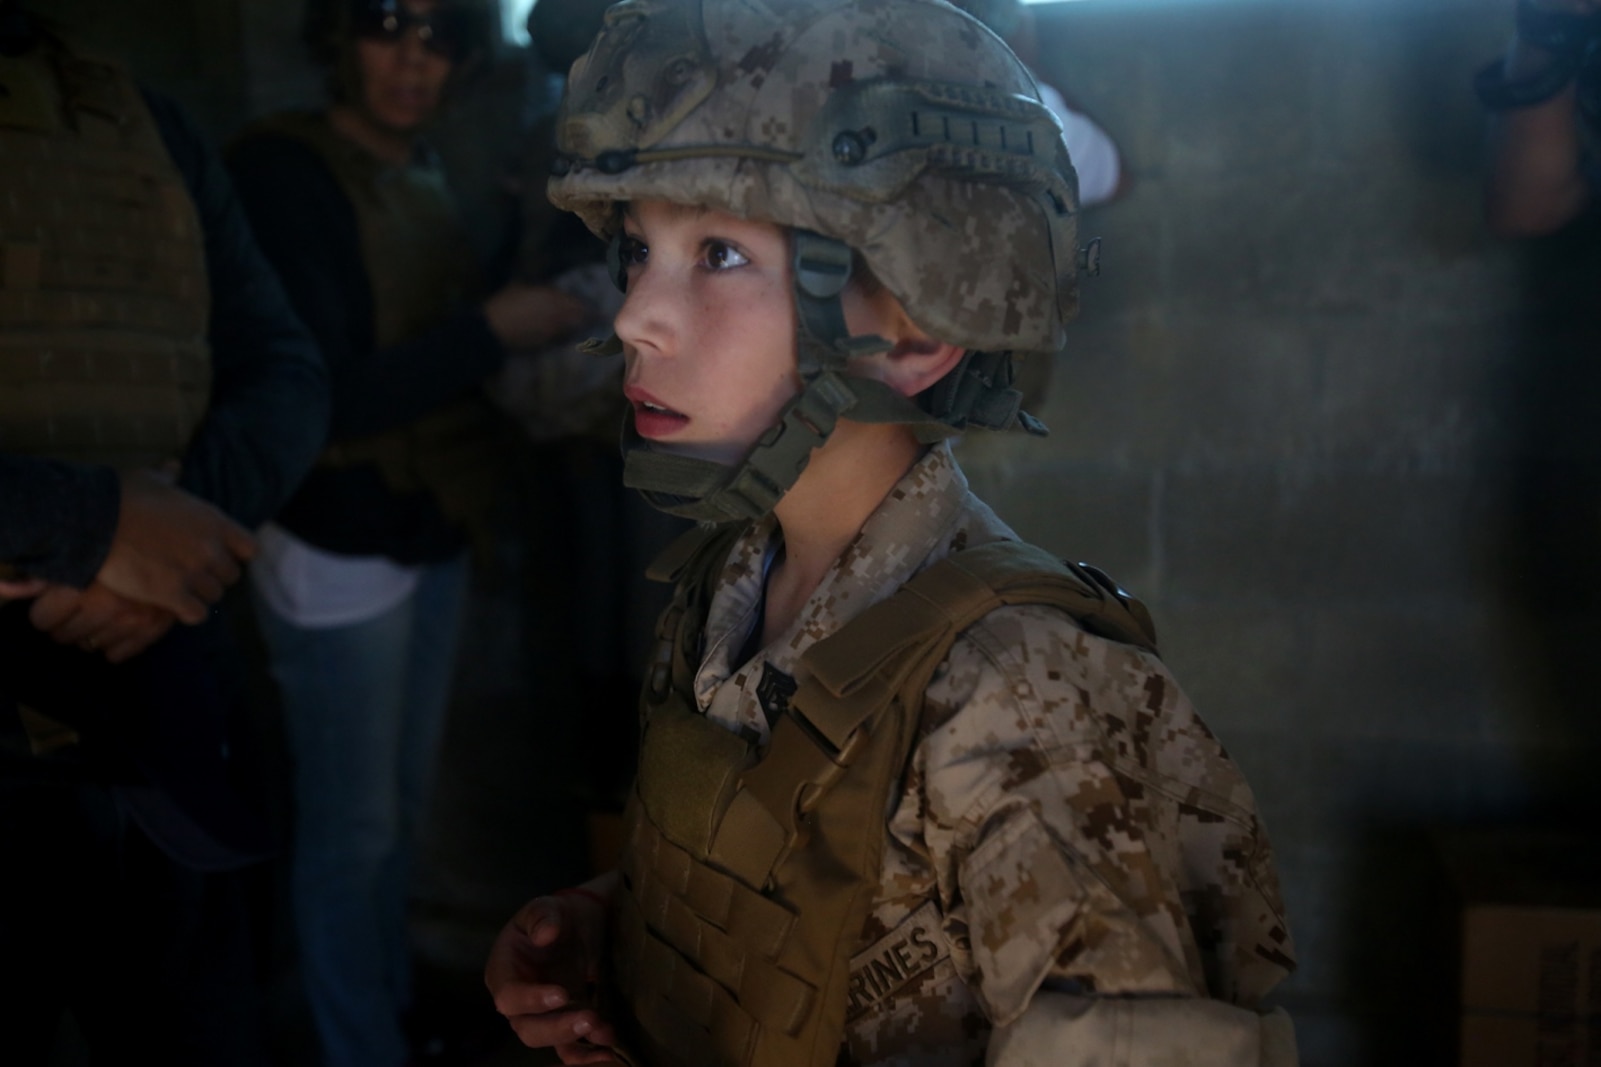 Nathan Aldaco, a 12 year-old boy with hypoplastic left heart syndrome, gets a safety brief before watching explosives detonate during a Make-A-Wish event supported by 7th Engineer Support Battalion, 1st Marine Logistics Group, aboard Camp Pendleton, Calif., March 24, 2016. Marines with 7th ESB and Explosive Ordnance Disposal helped to make Nathan’s wish of becoming a Marine come true by demonstrating the capabilities of their EOD robots and detonating TNT, C4, dynamite and blasting caps, while the heavy equipment operators gave him the opportunity to ride the D7 dozer and the excavator, in which he dug a pit, built a berm, and broke several large tree trunks.  (U.S. Marine Corps photo by Sgt. Laura Gauna/released)